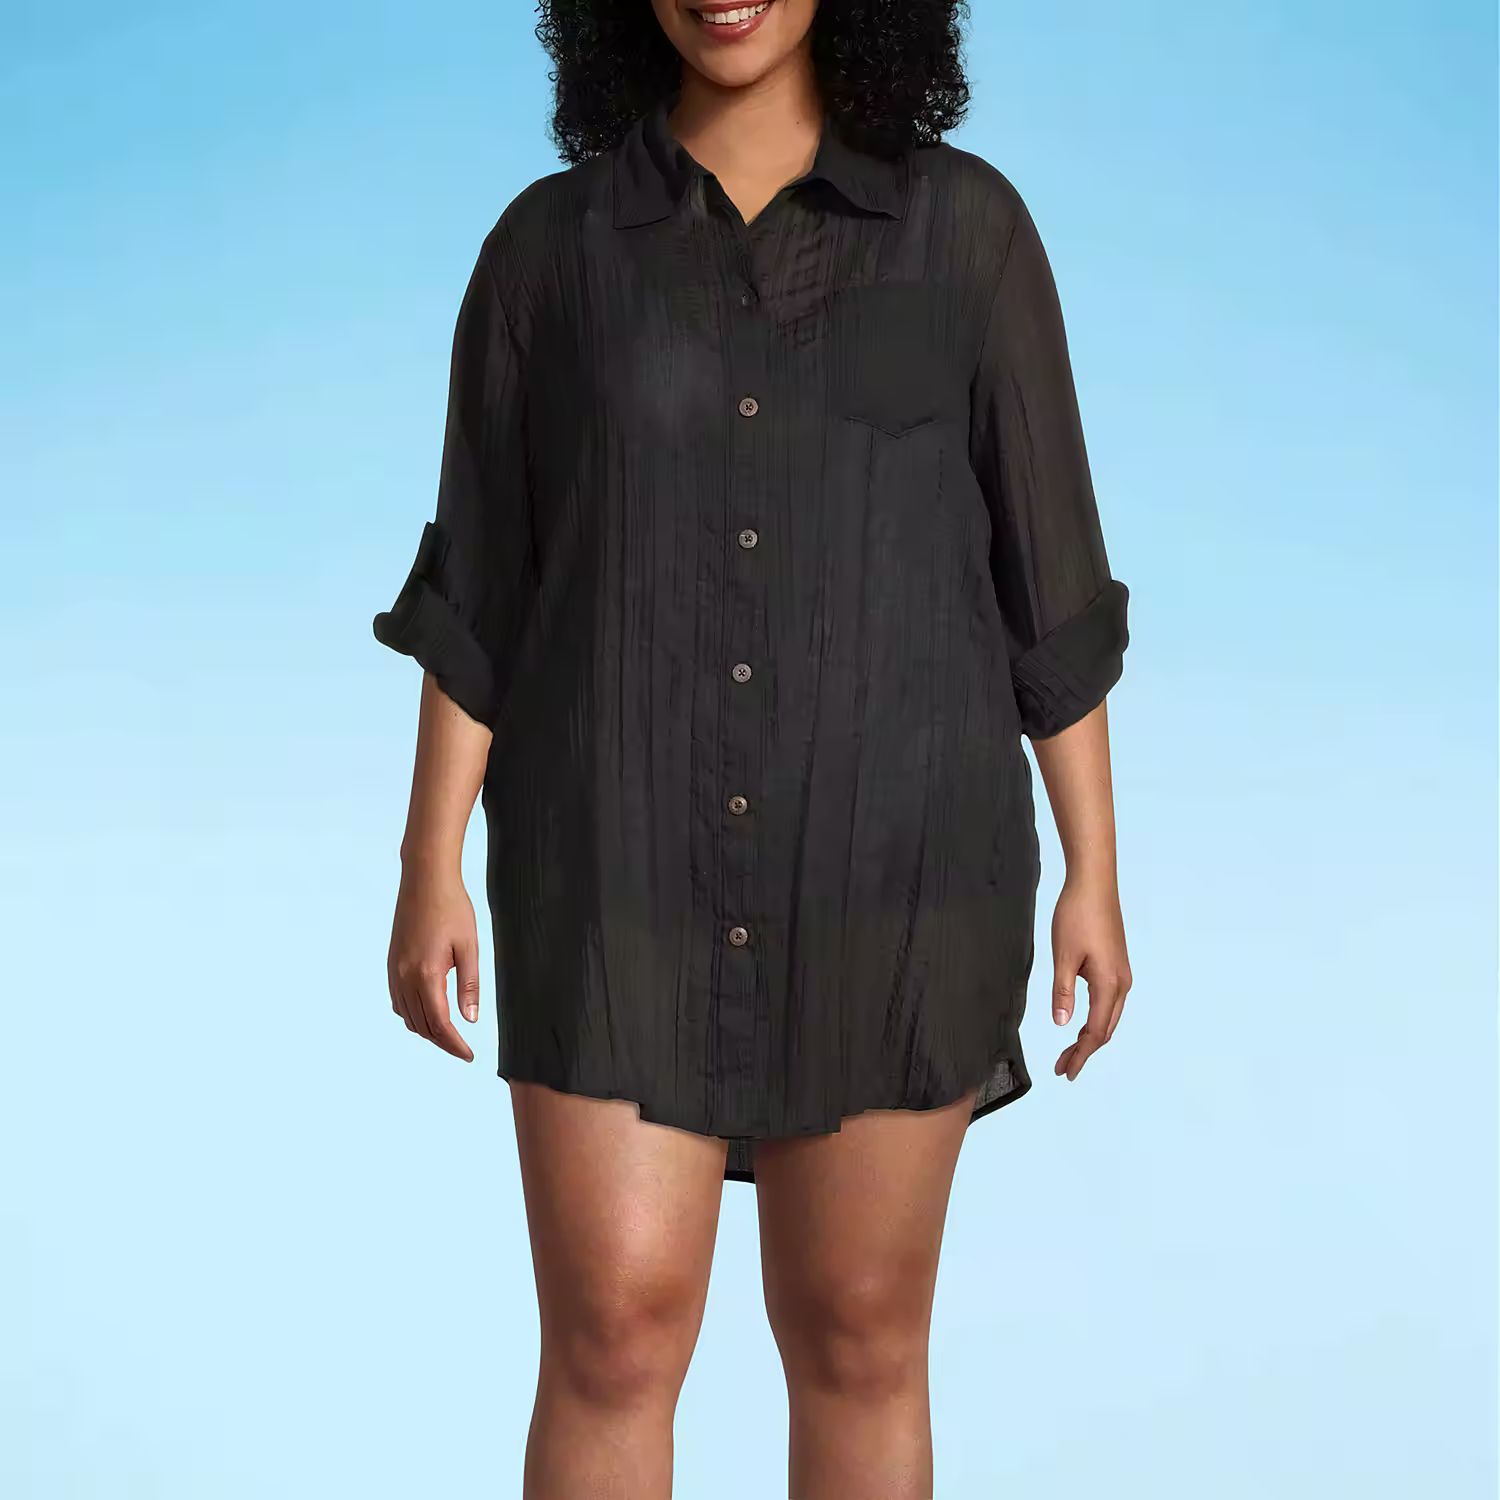 Mynah Dress Swimsuit Cover-Up | JCPenney